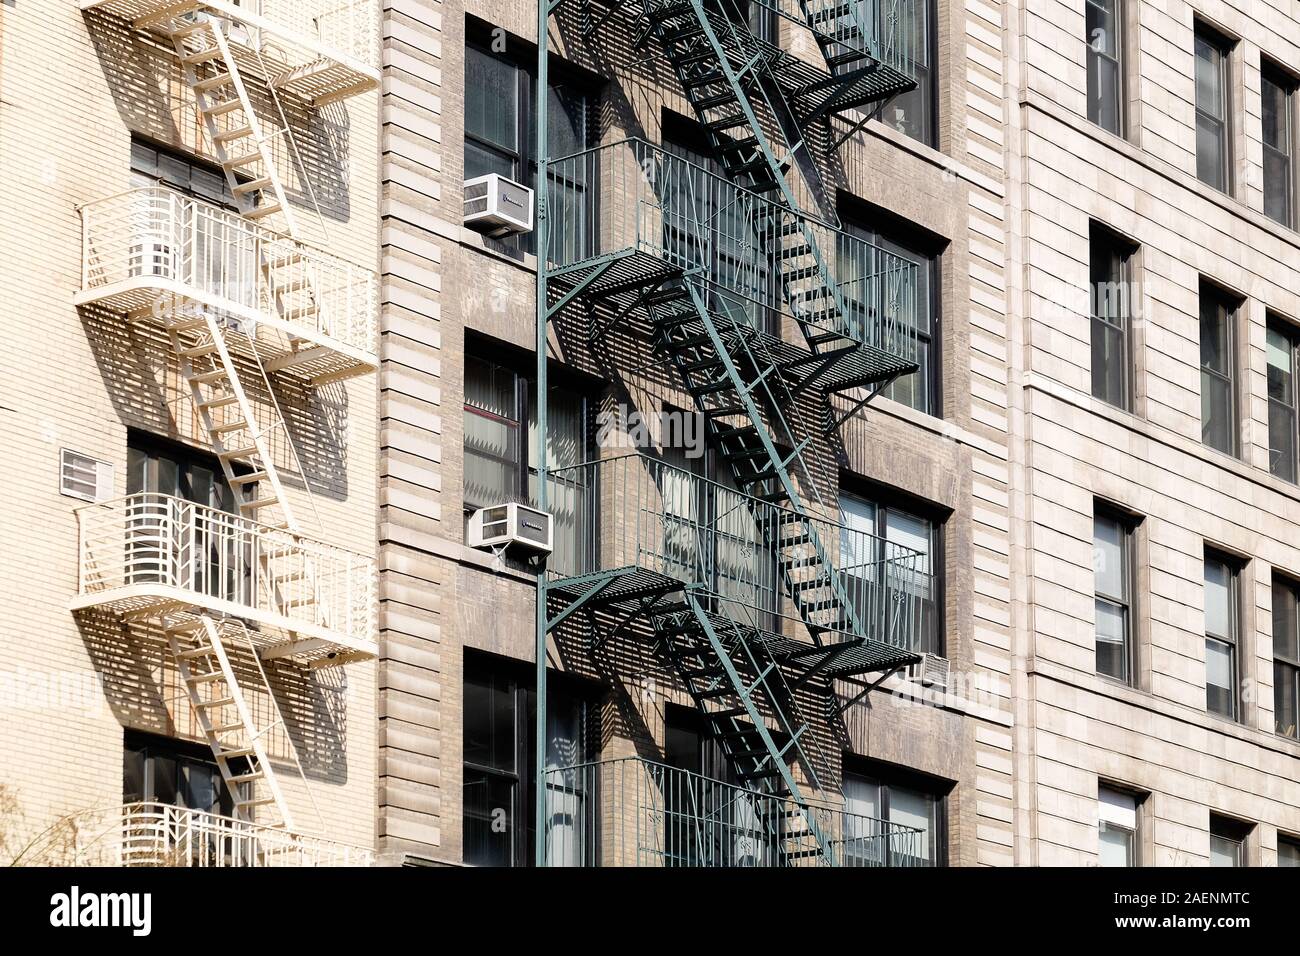 Fire escape stairs on outside of NYC building Stock Photo